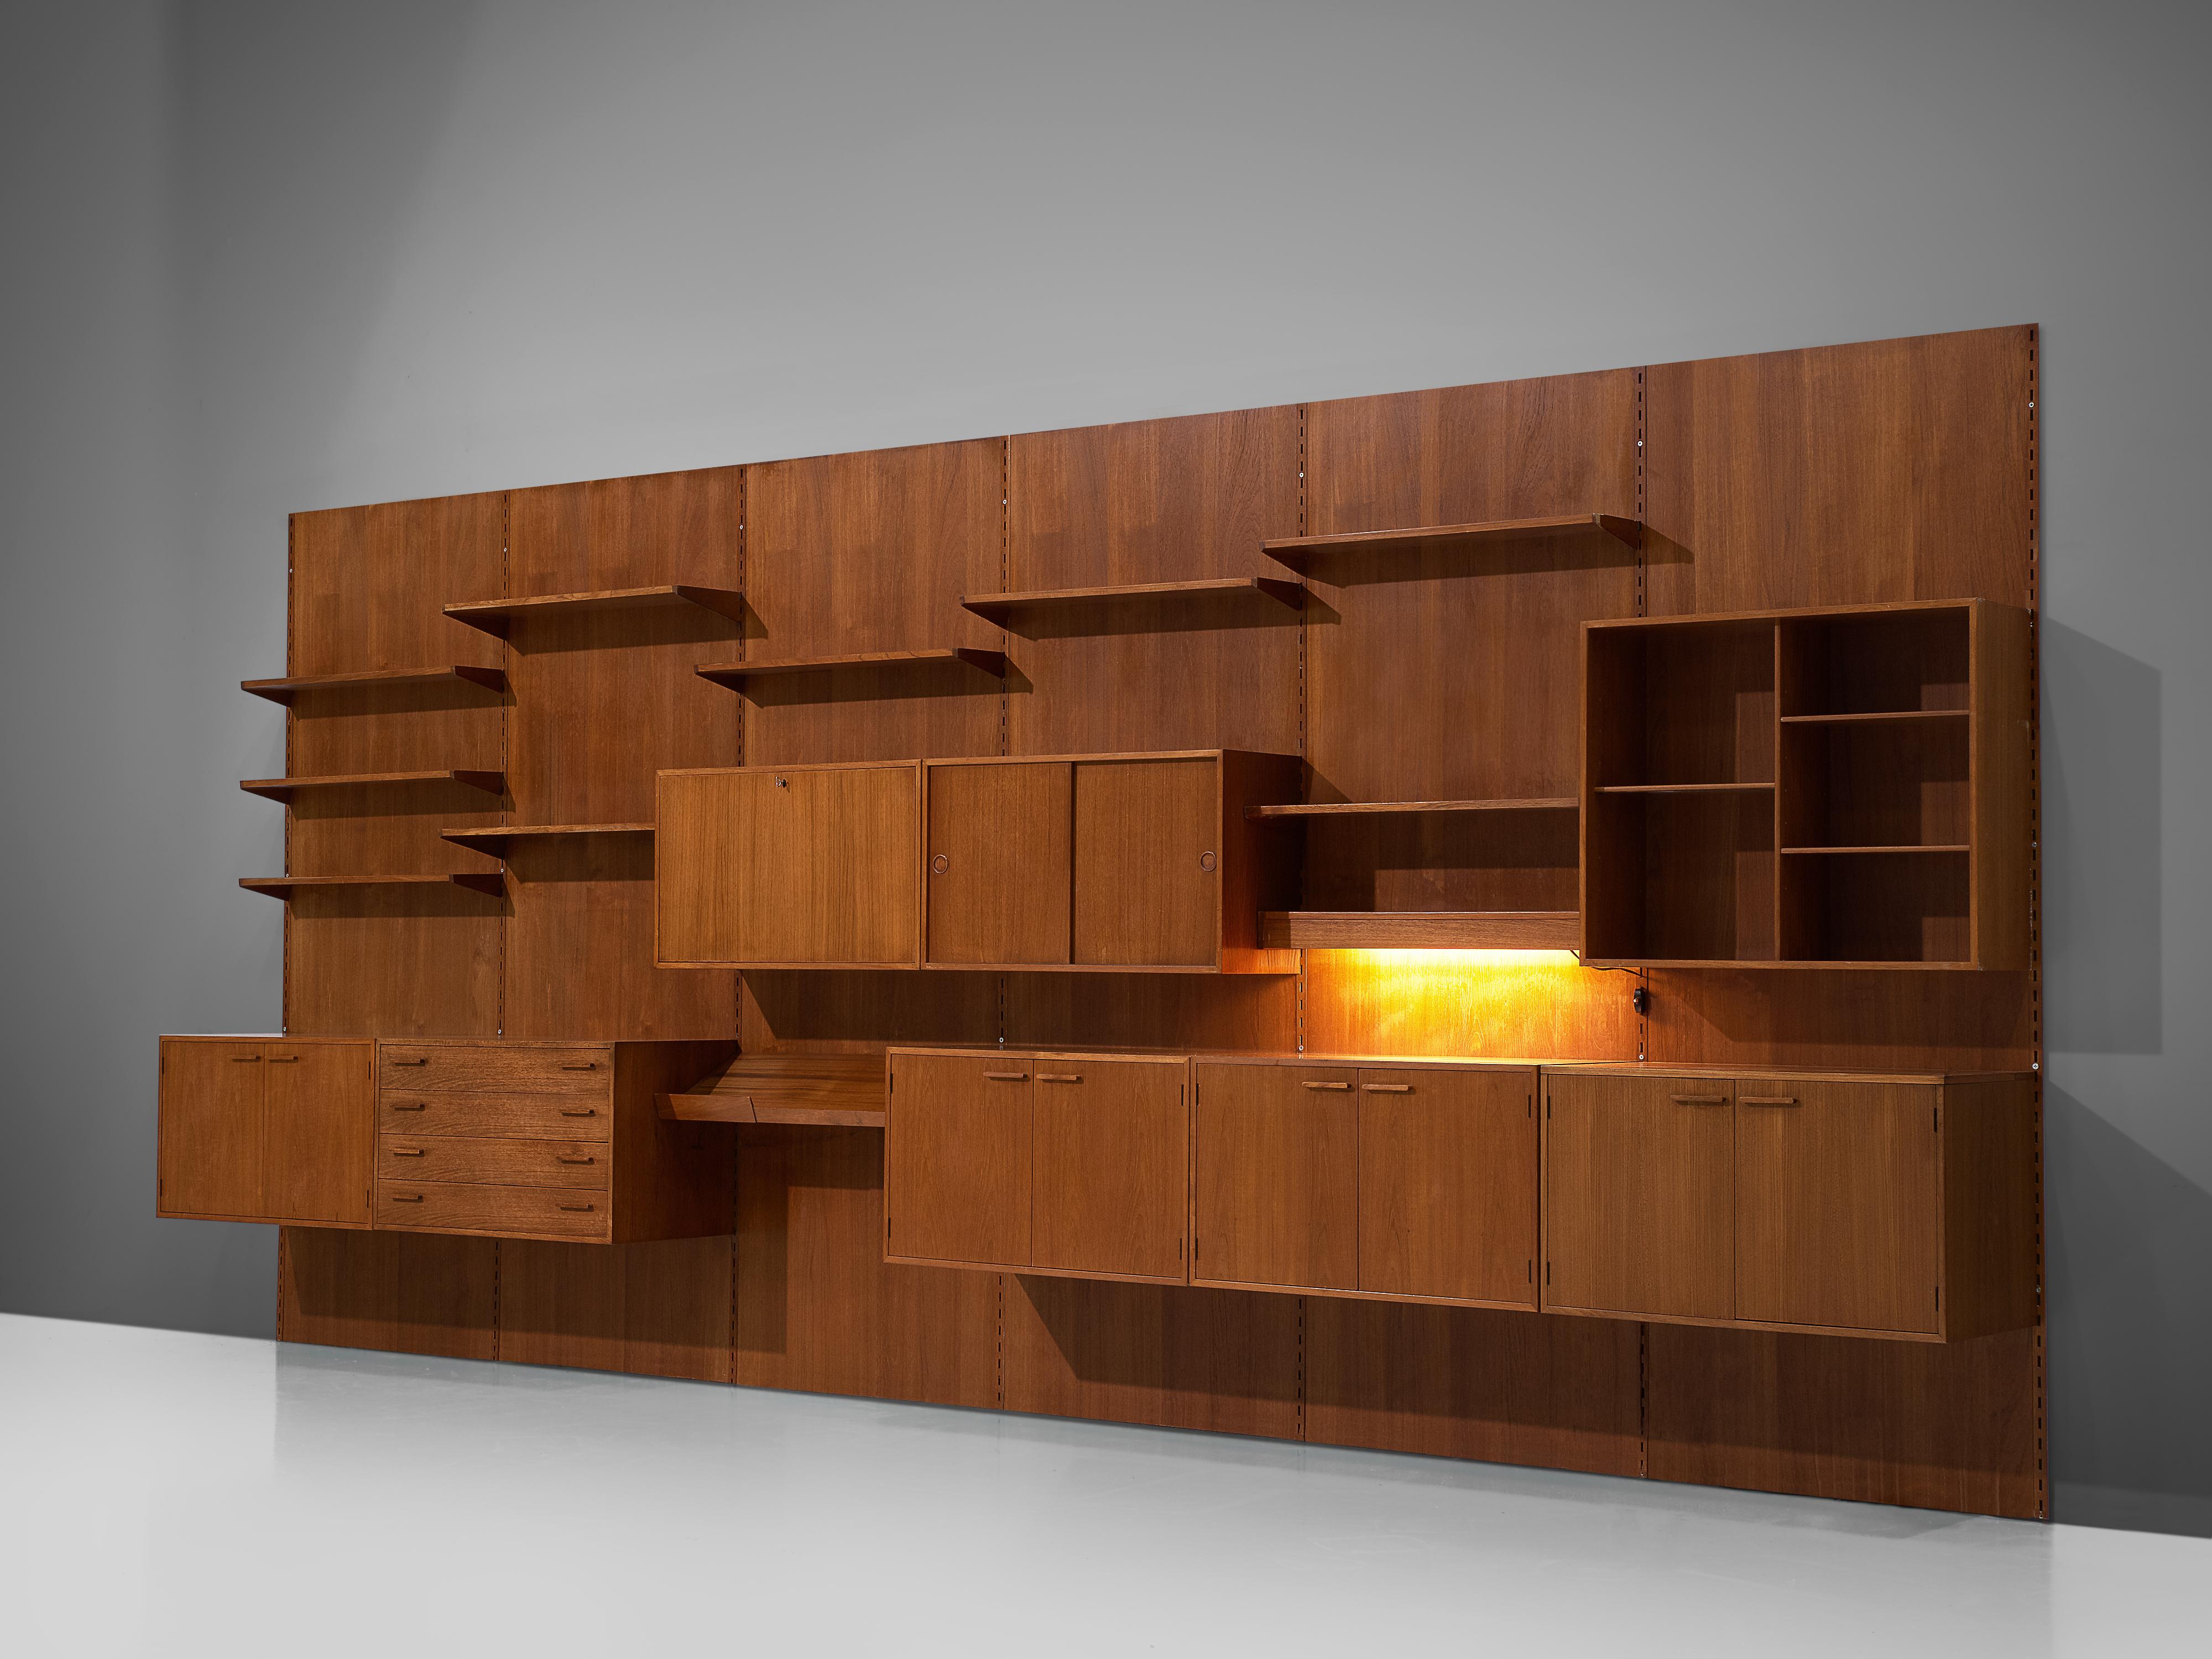 Kai Kristiansen for Feldballes Møbelfabrik, wall-mounted shelving unit, teak, Denmark, circa 1955.

This large 5.2mt/17ft wall unit was designed by Danish designer Kai Kristiansen. The cabinet consists of six wall-mounted compartments that allow